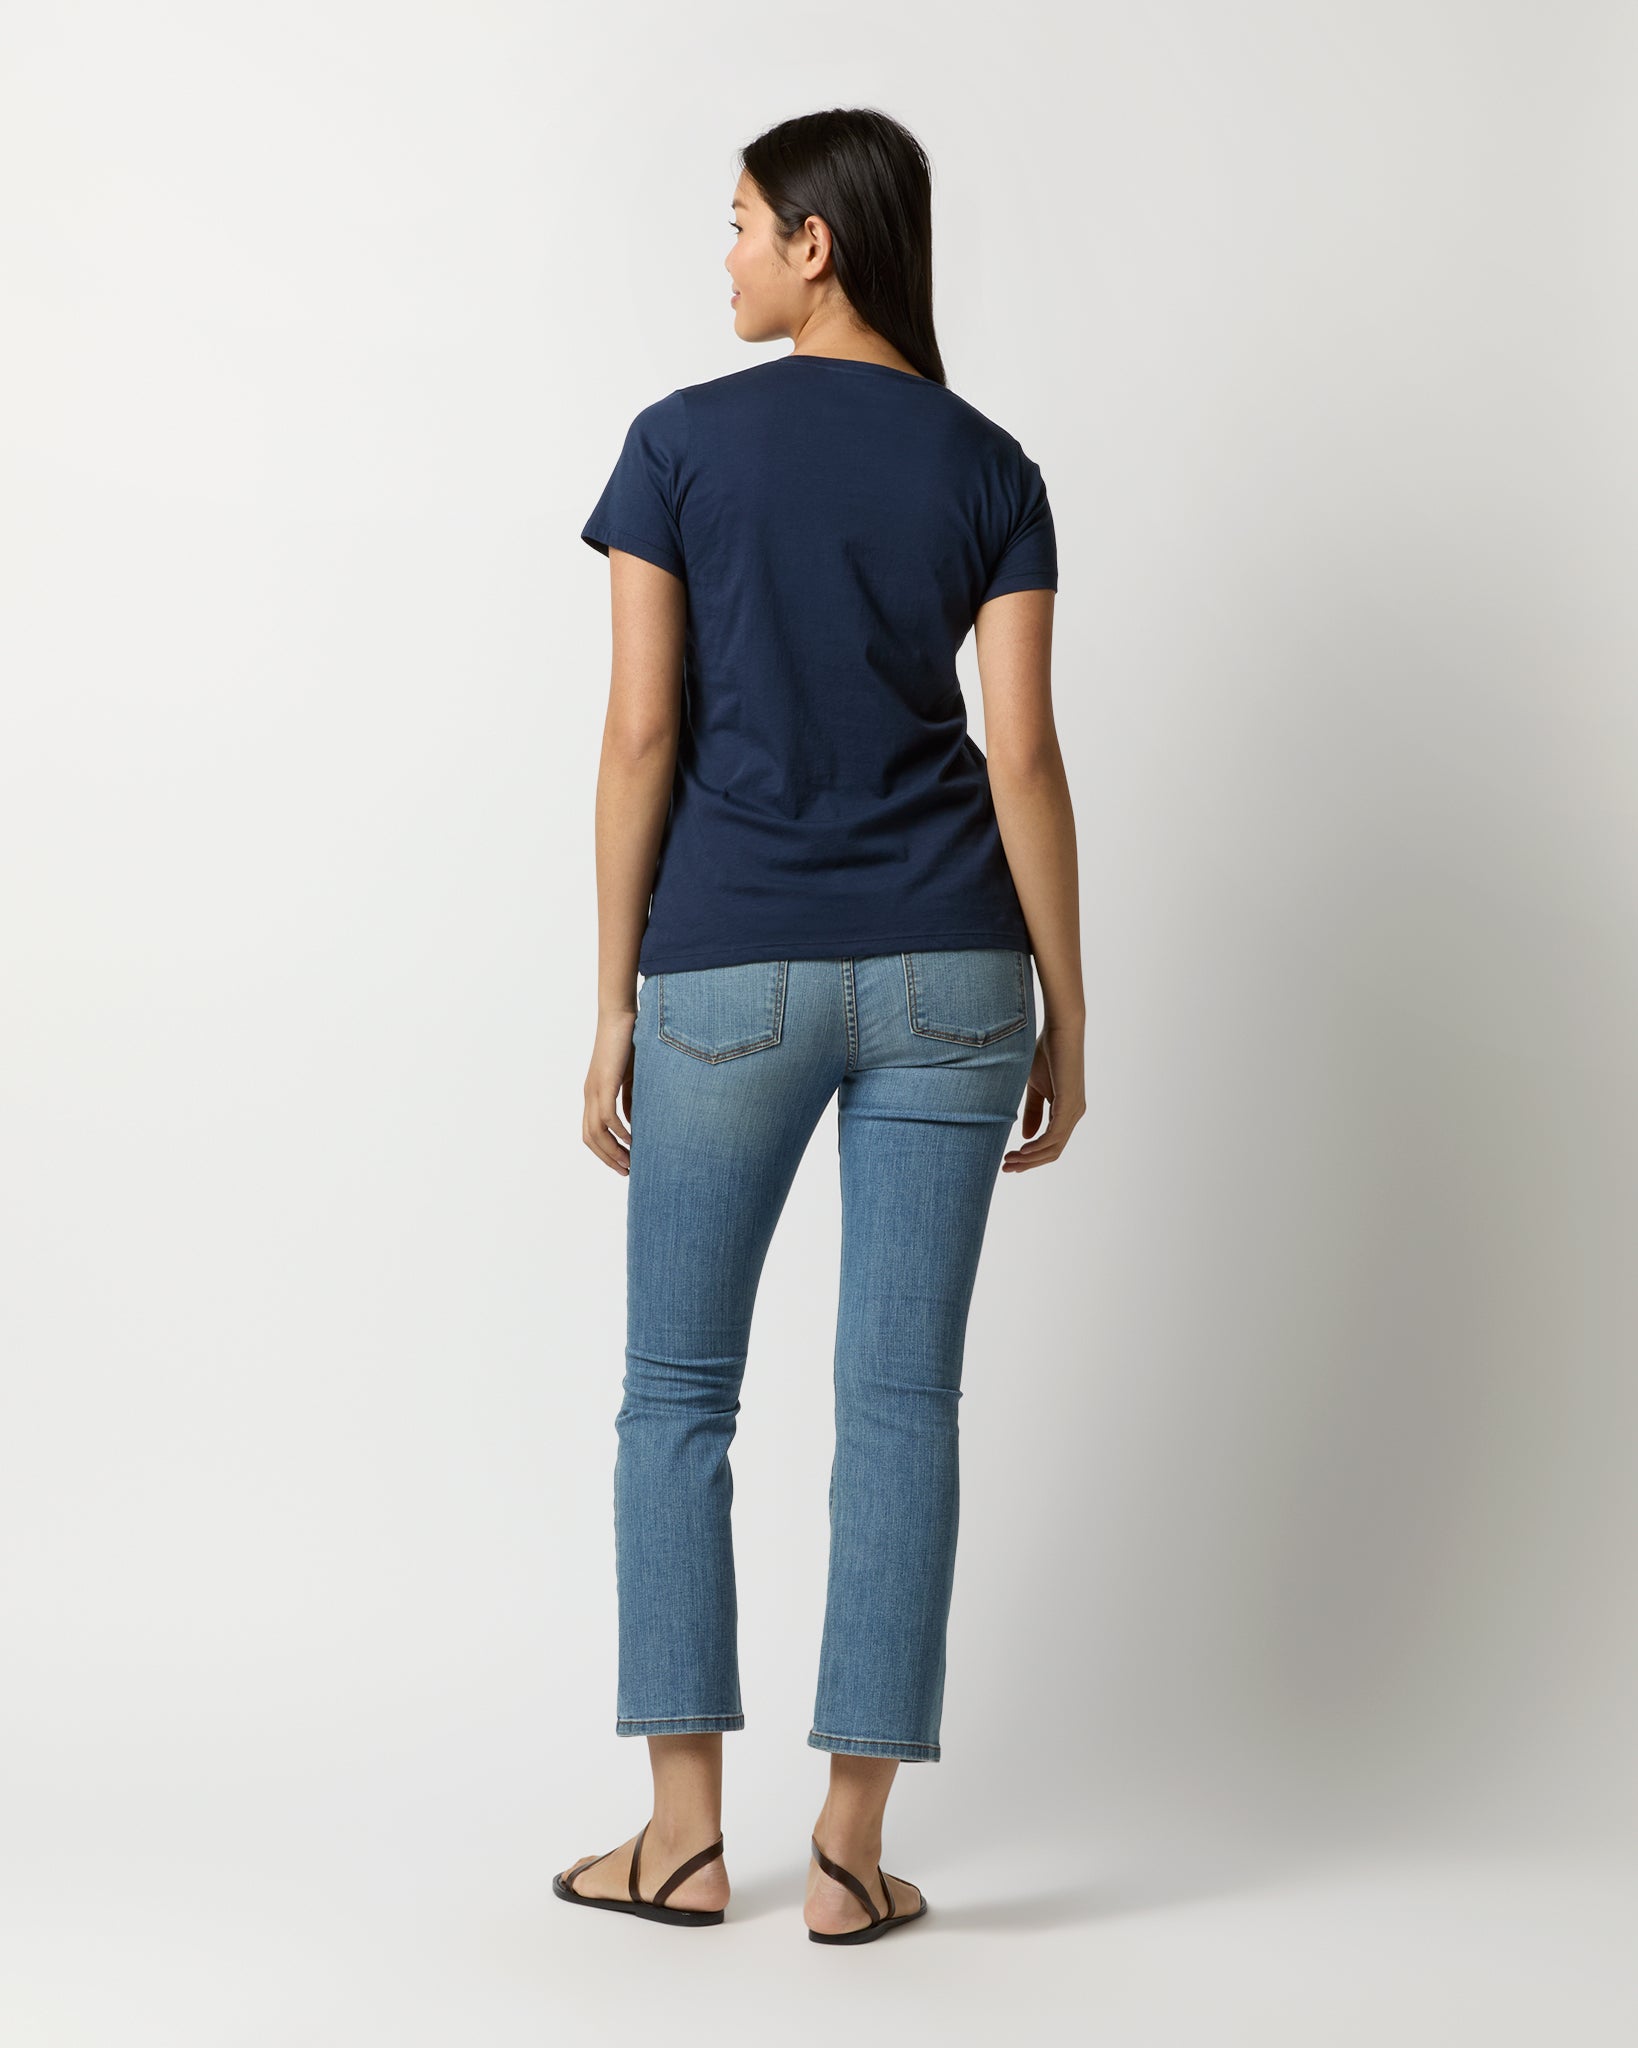 Short-Sleeved Relaxed Tee in Navy Pima Cotton